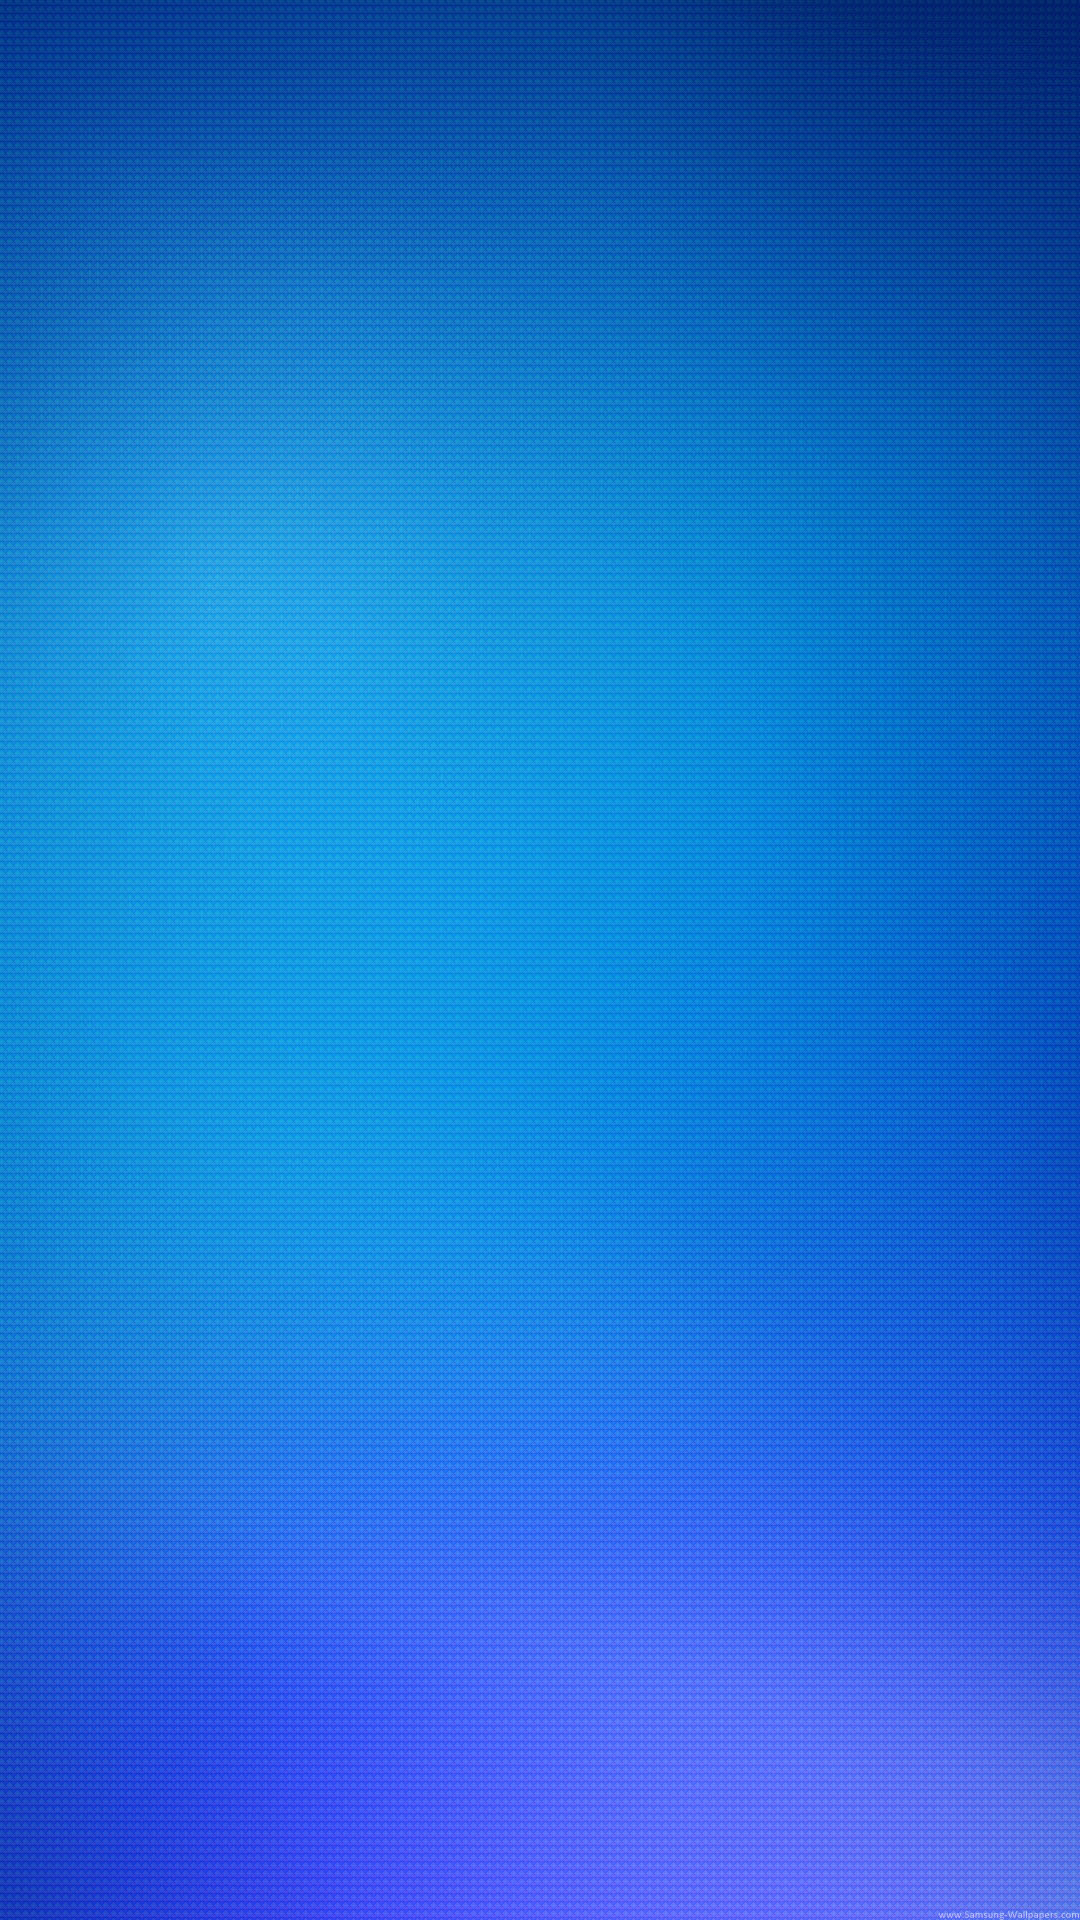 Iphone Wallpaper - Simple Blue Wallpaper Hd For Android - HD Wallpaper 